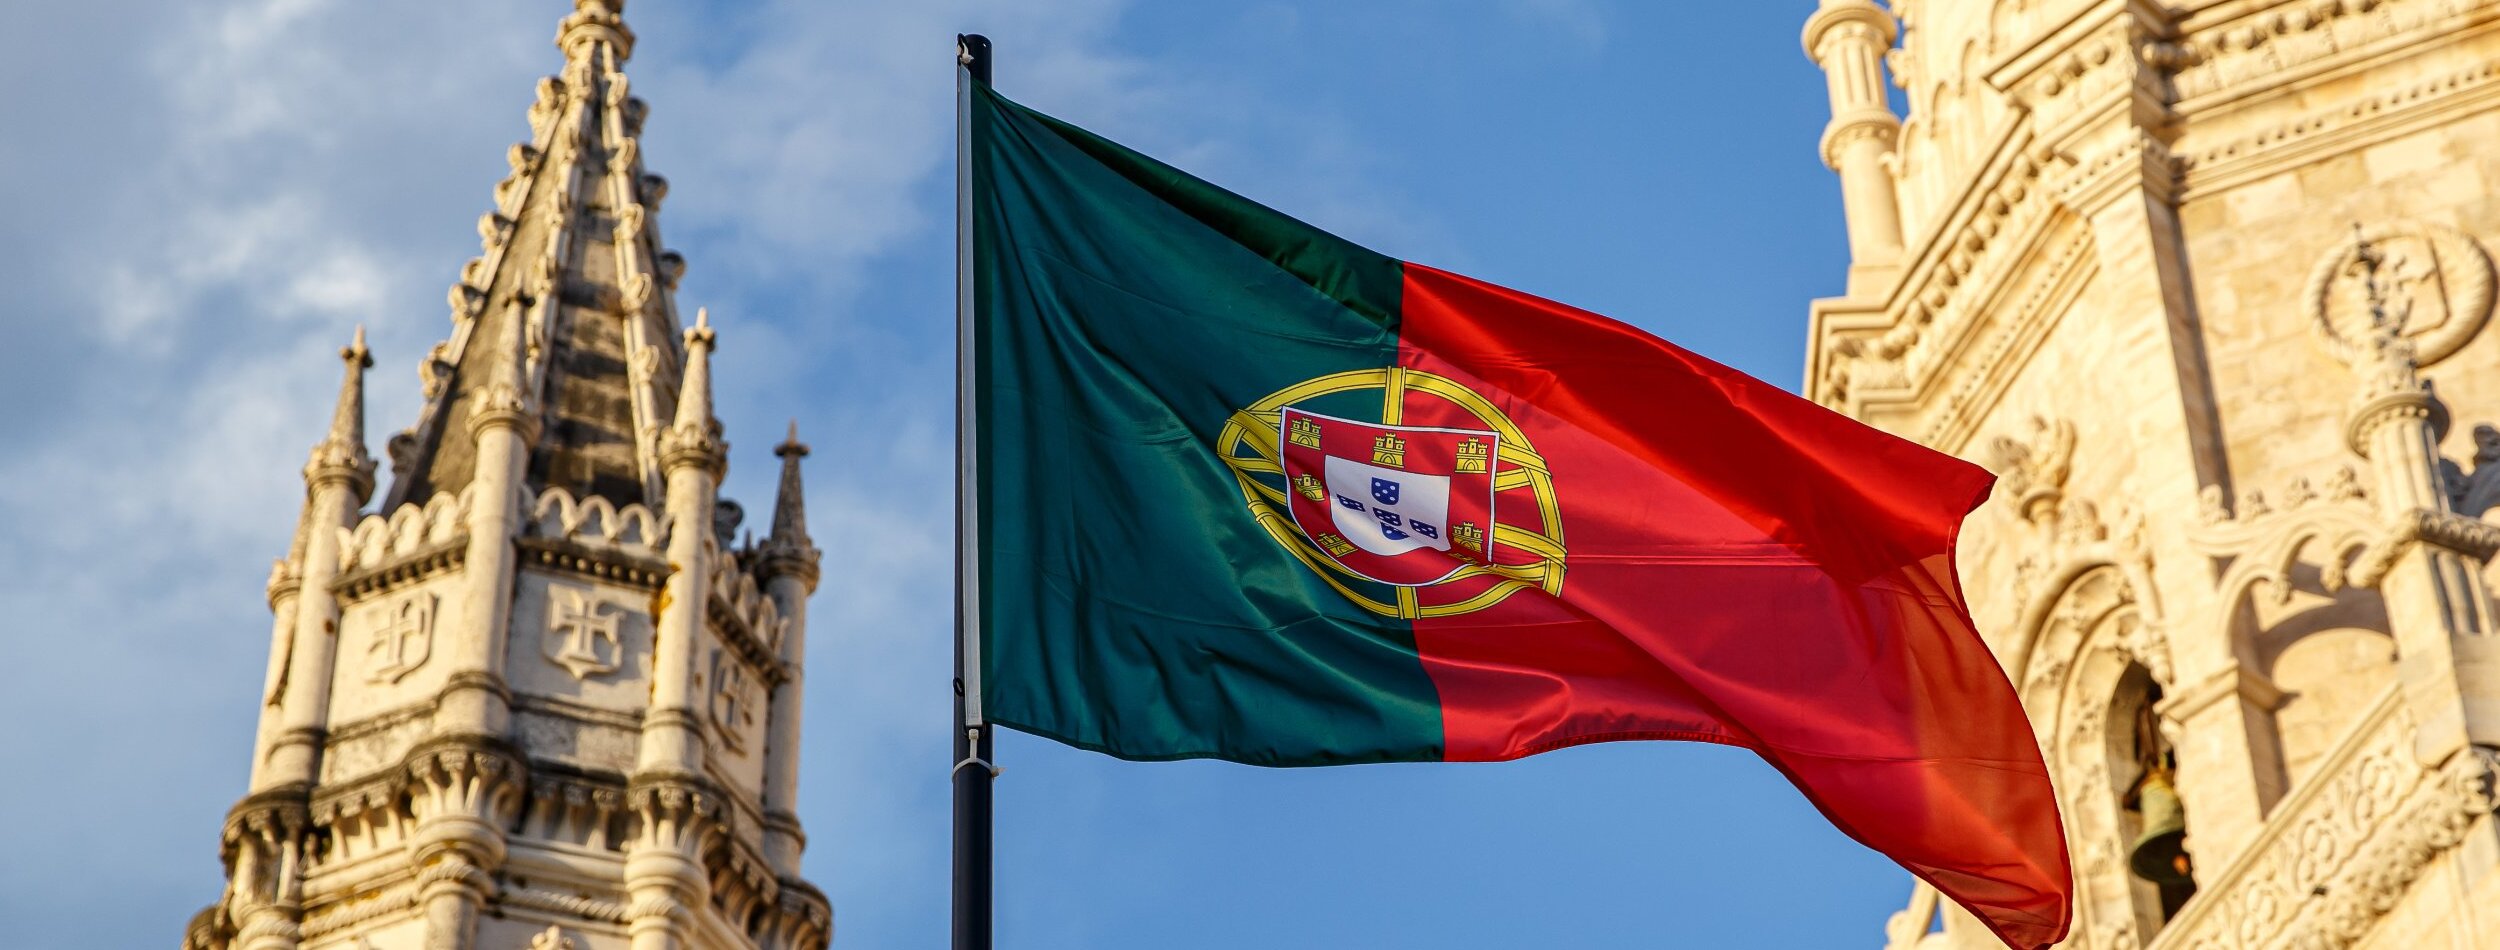 A Portugal Flag in front of a Castle